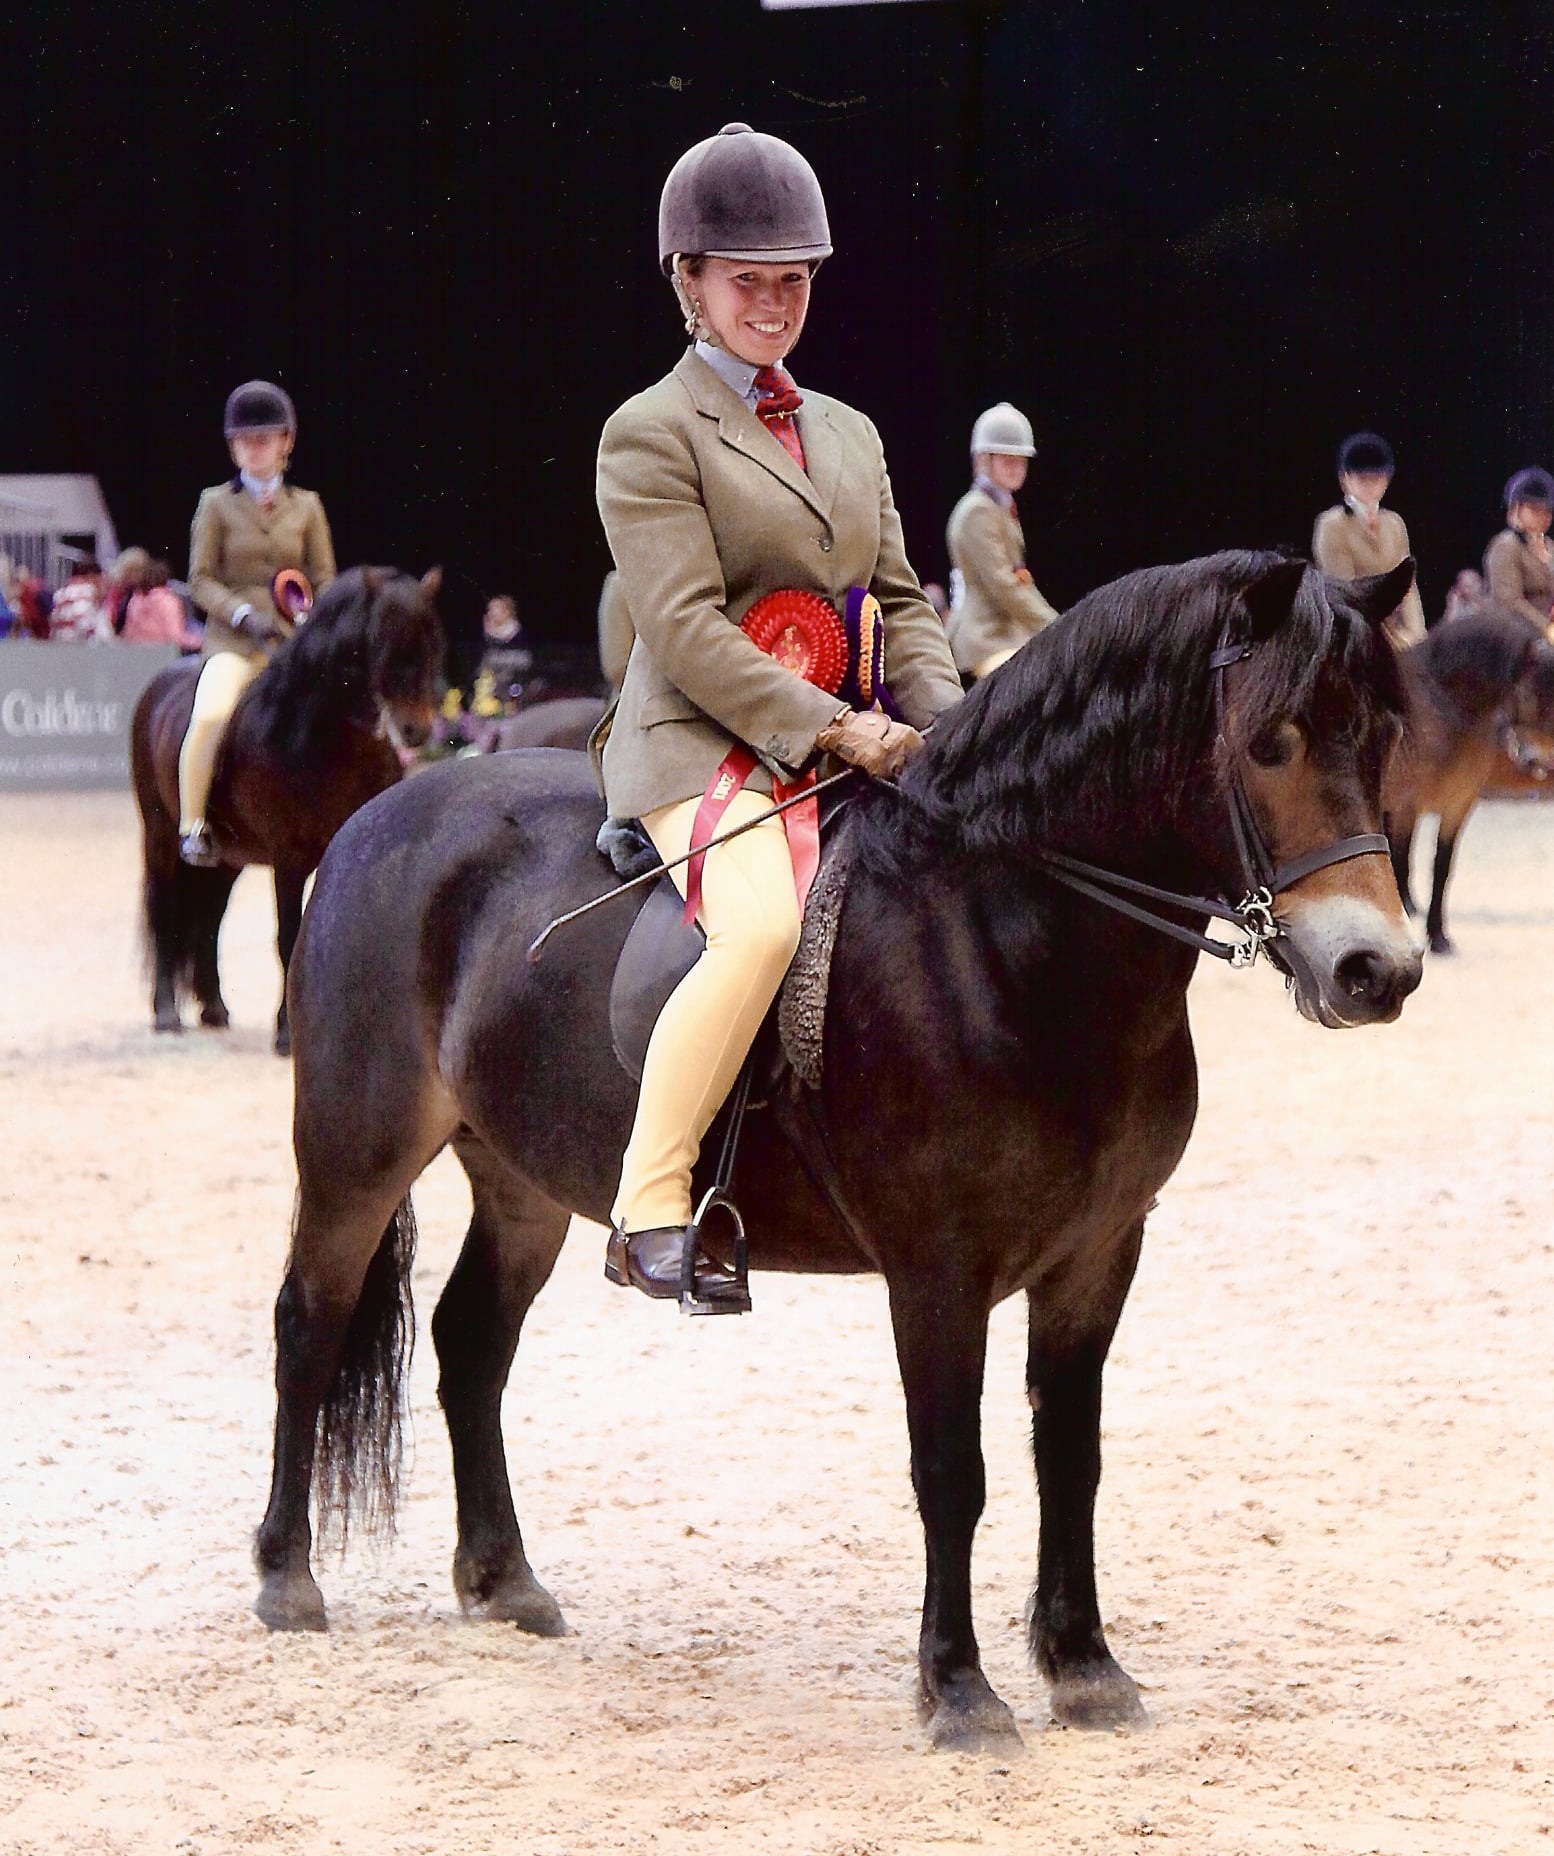 MM Ridden Pony of the Year Blackthorn Blush Rose ridden by Katy Marriot Payne and owned by Elizabeth Nicholls